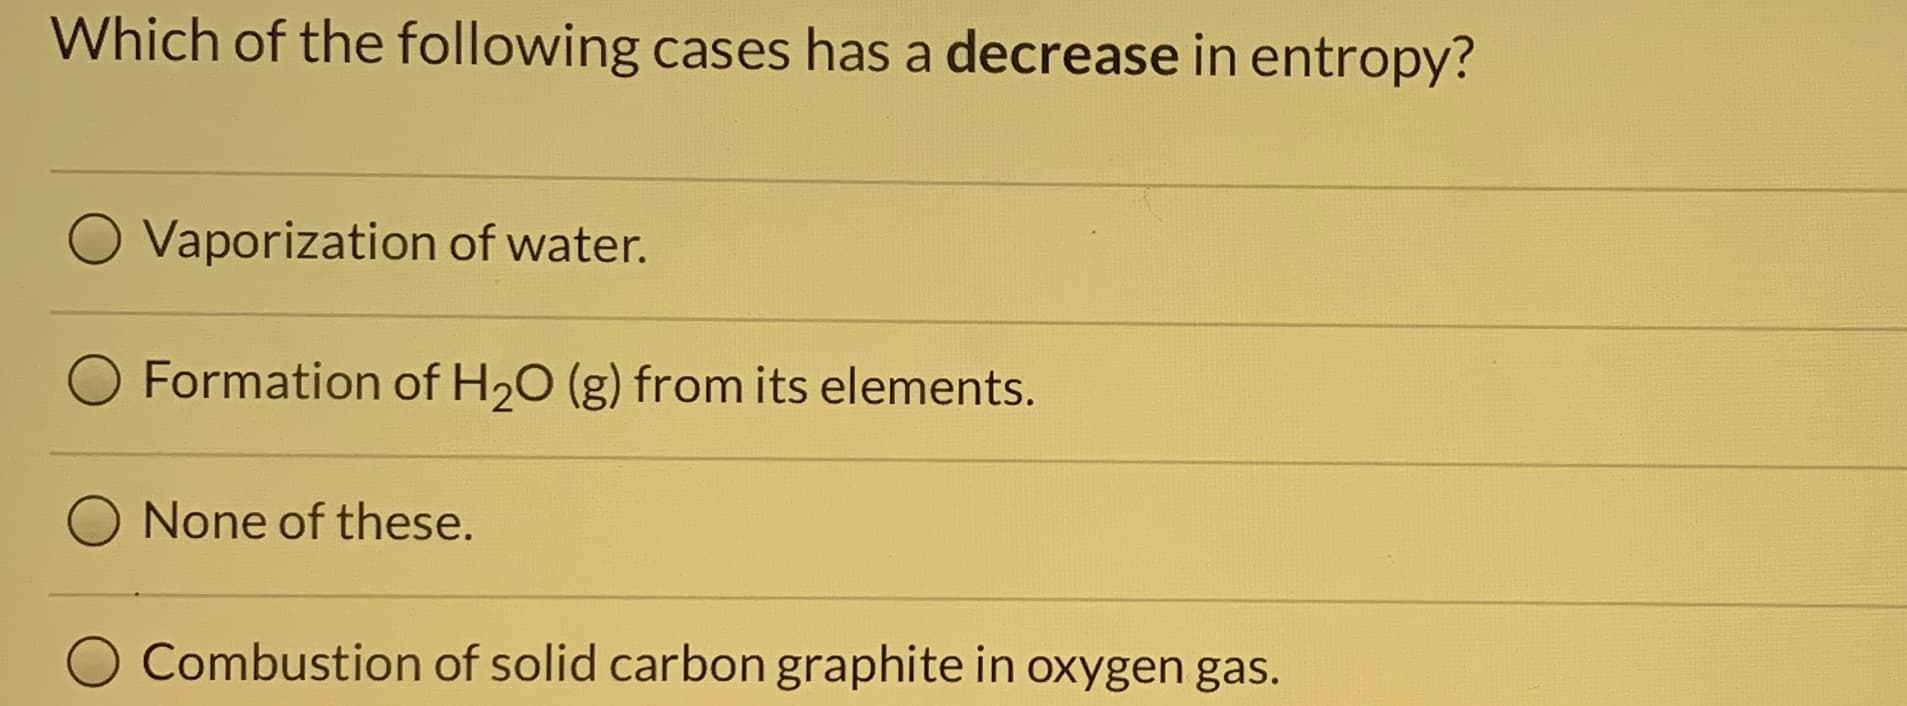 Which of the following cases has a decrease in entropy?
Vaporization of water.
Formation of H20 (g) from its elements.
None of these.
Combustion of solid carbon graphite in oxygen gas.
